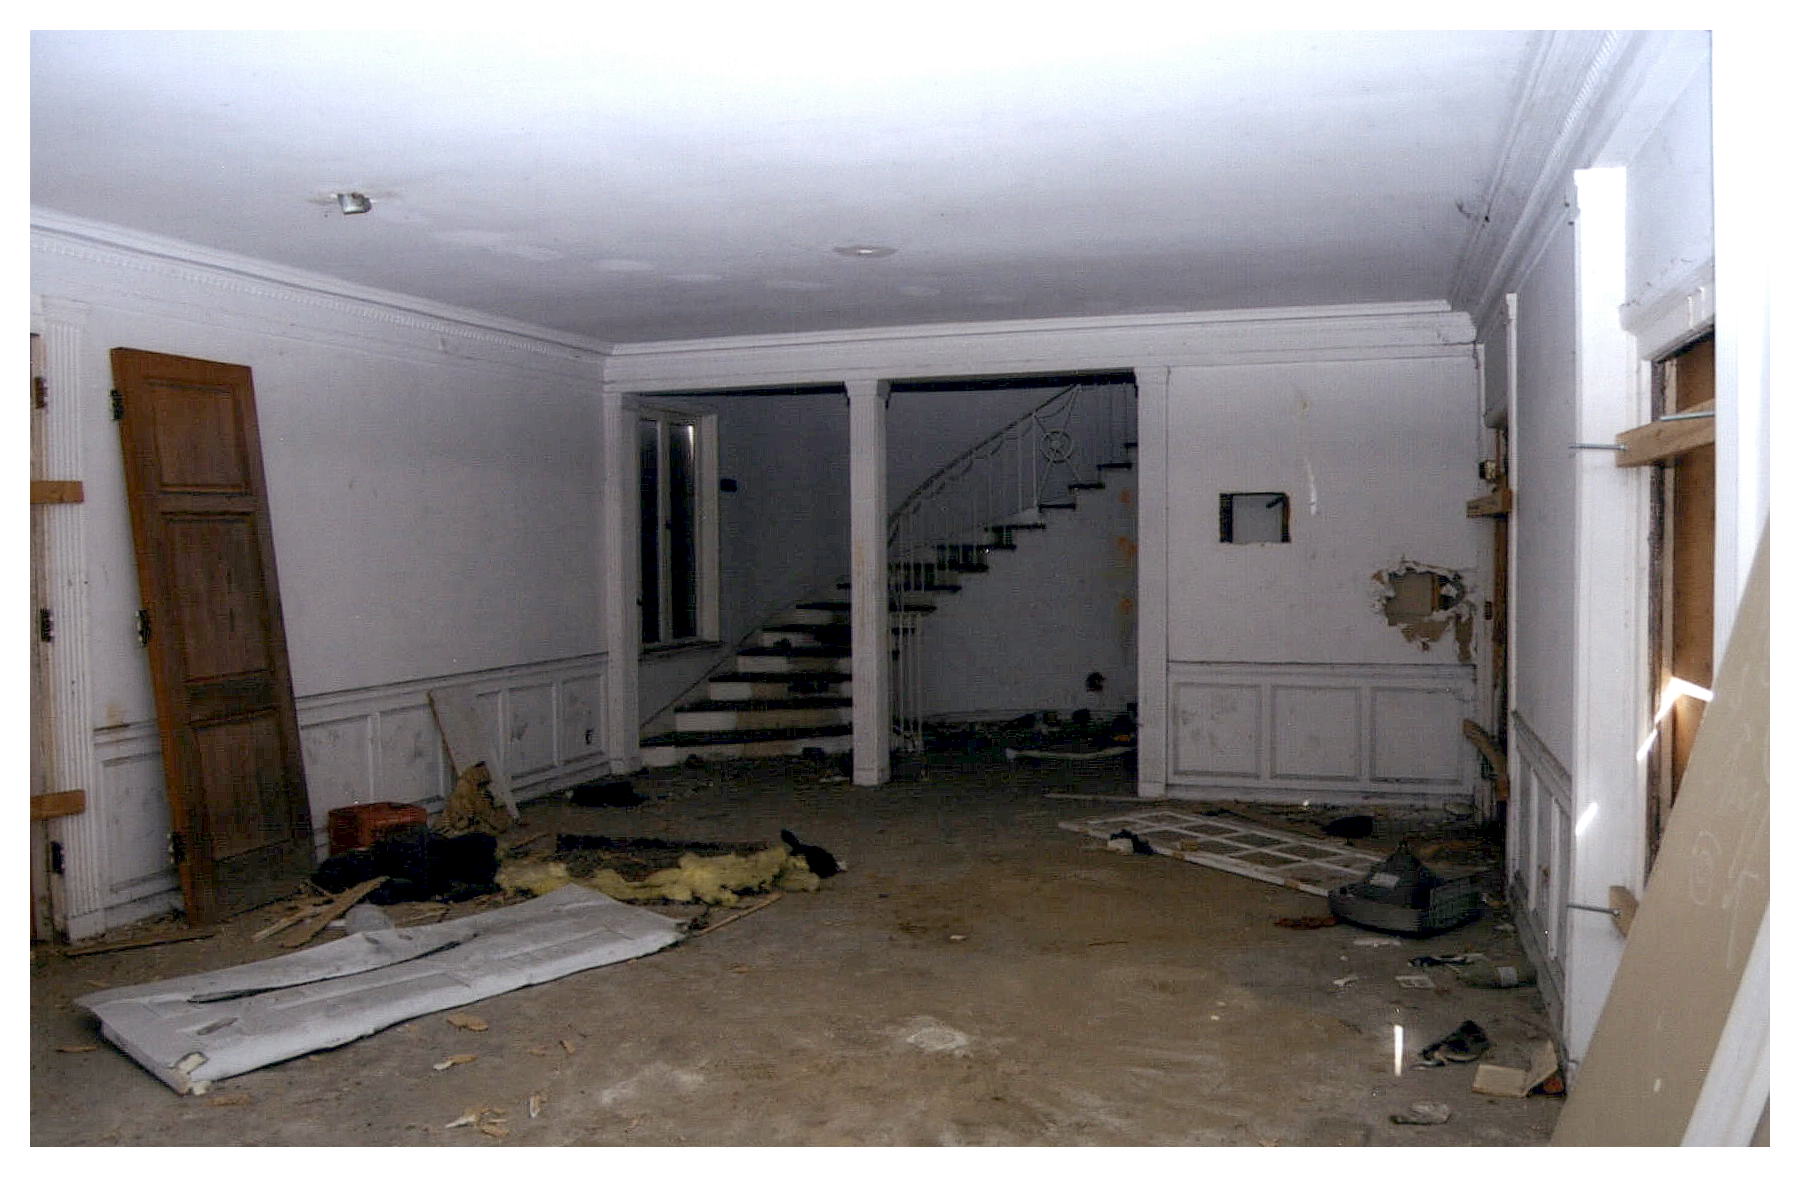 Before: same view of lobby cluttered with debris.